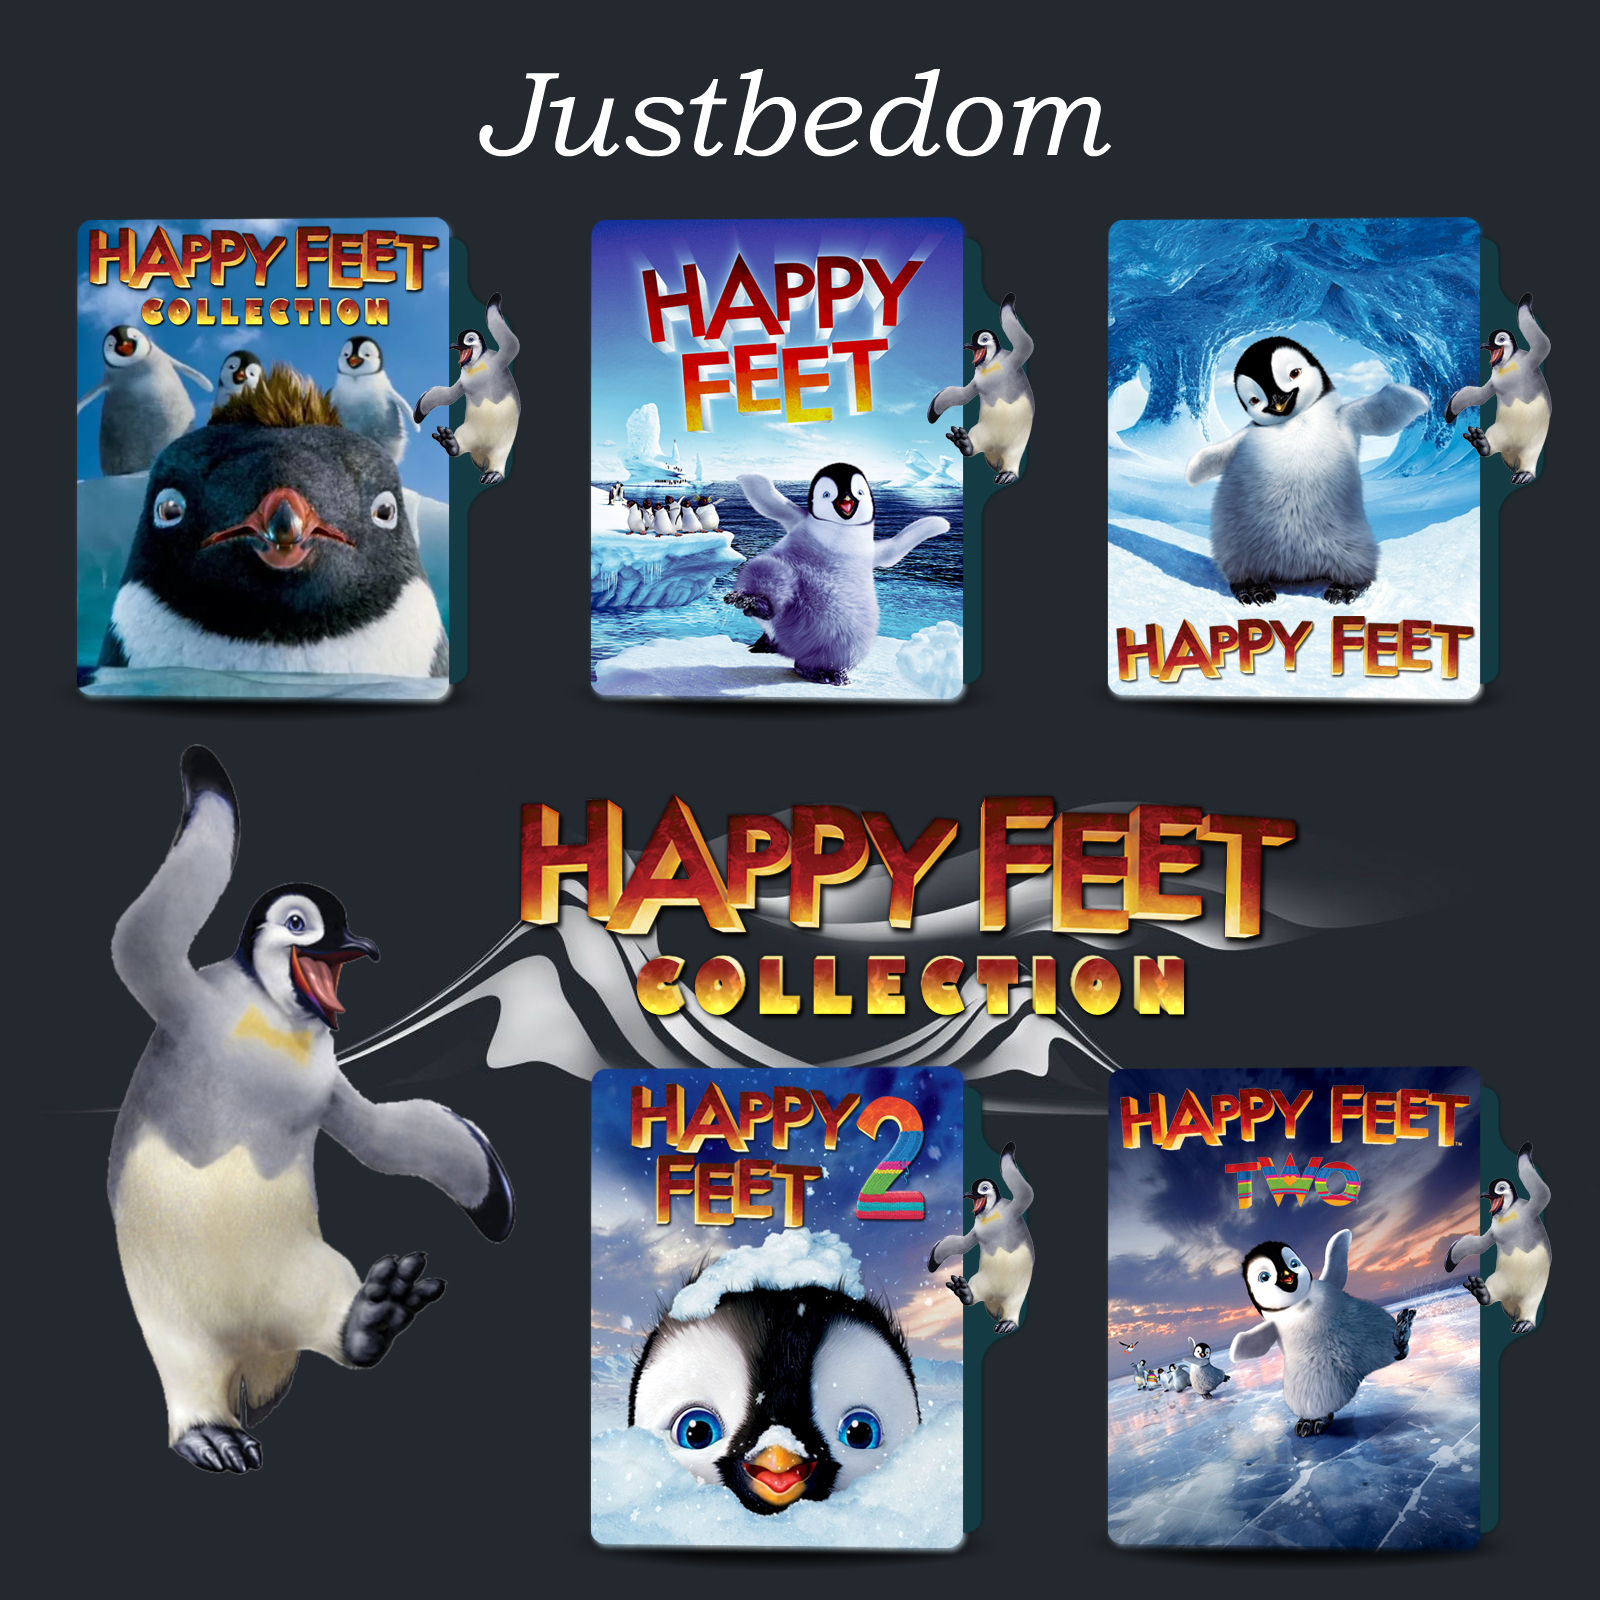 Happy Feet [Collection] by justbedom on DeviantArt